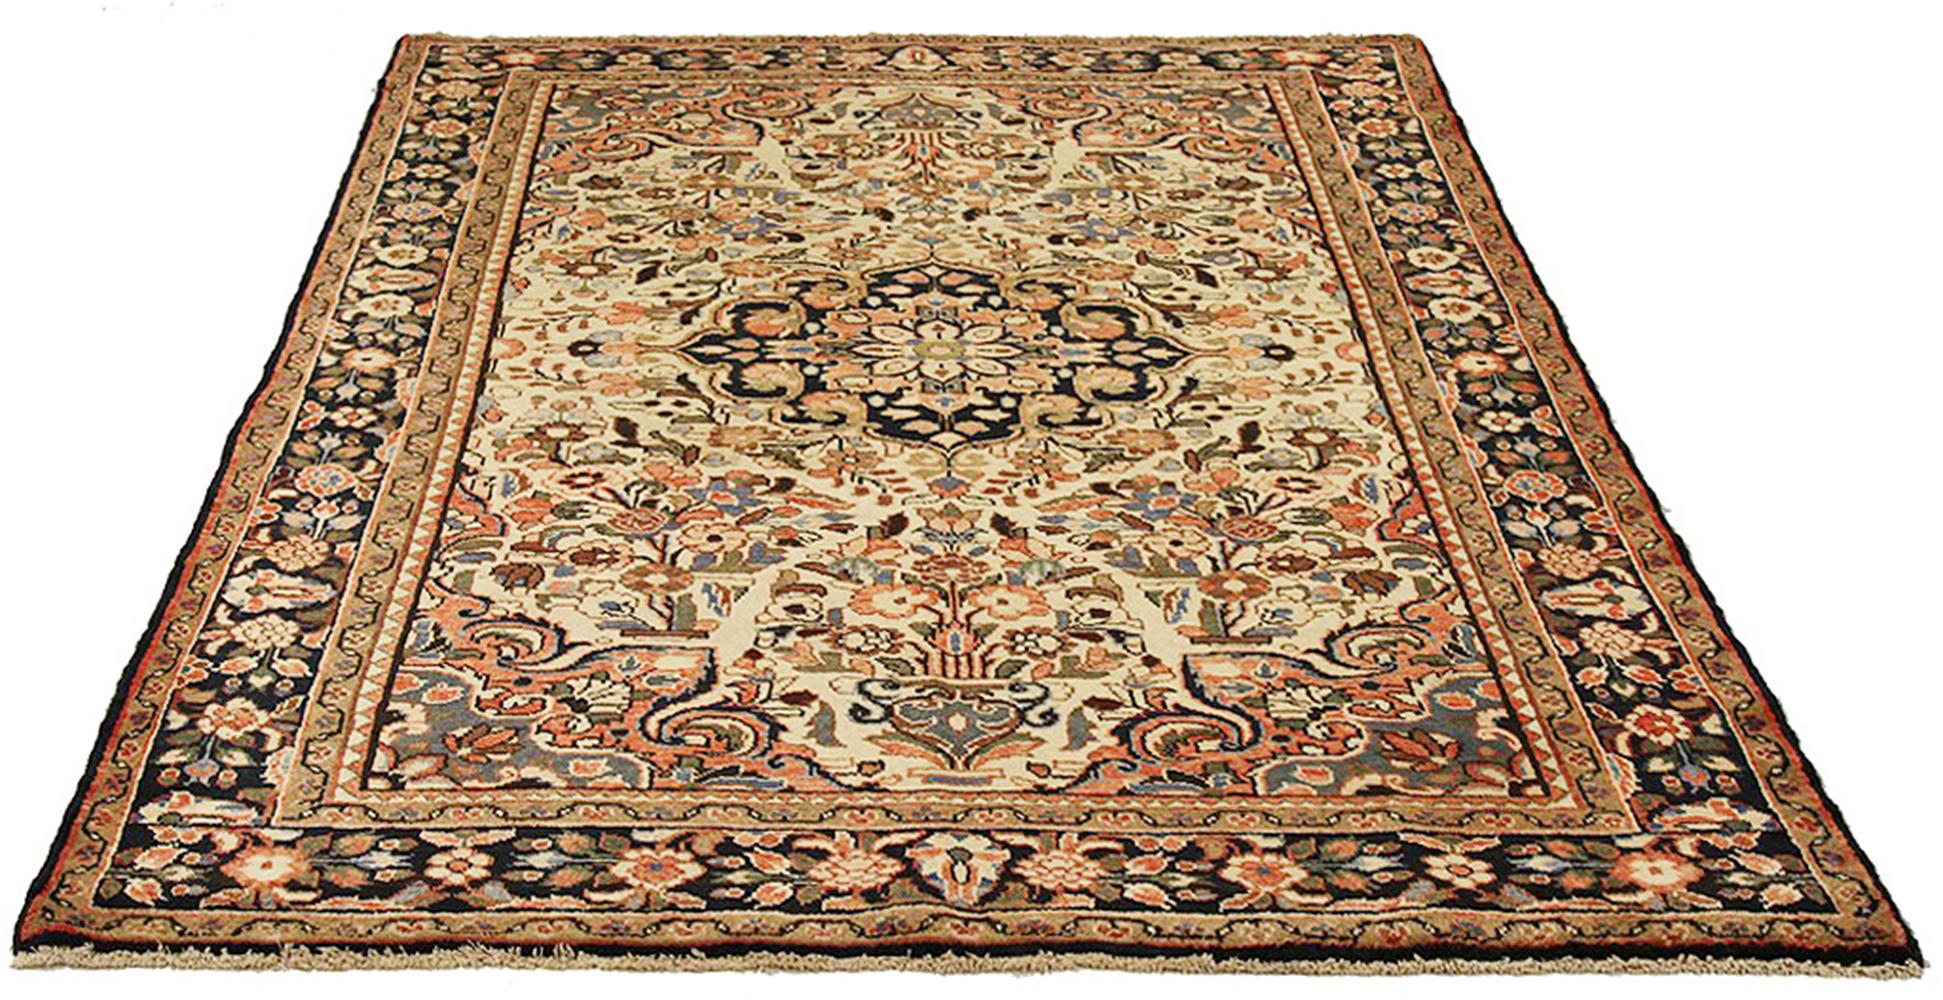 Antique Persian rug handwoven from the finest sheep’s wool and colored with all-natural vegetable dyes that are safe for humans and pets. It’s a traditional Hamedan design featuring floral patterns in lovely colors of blue and green over an ivory